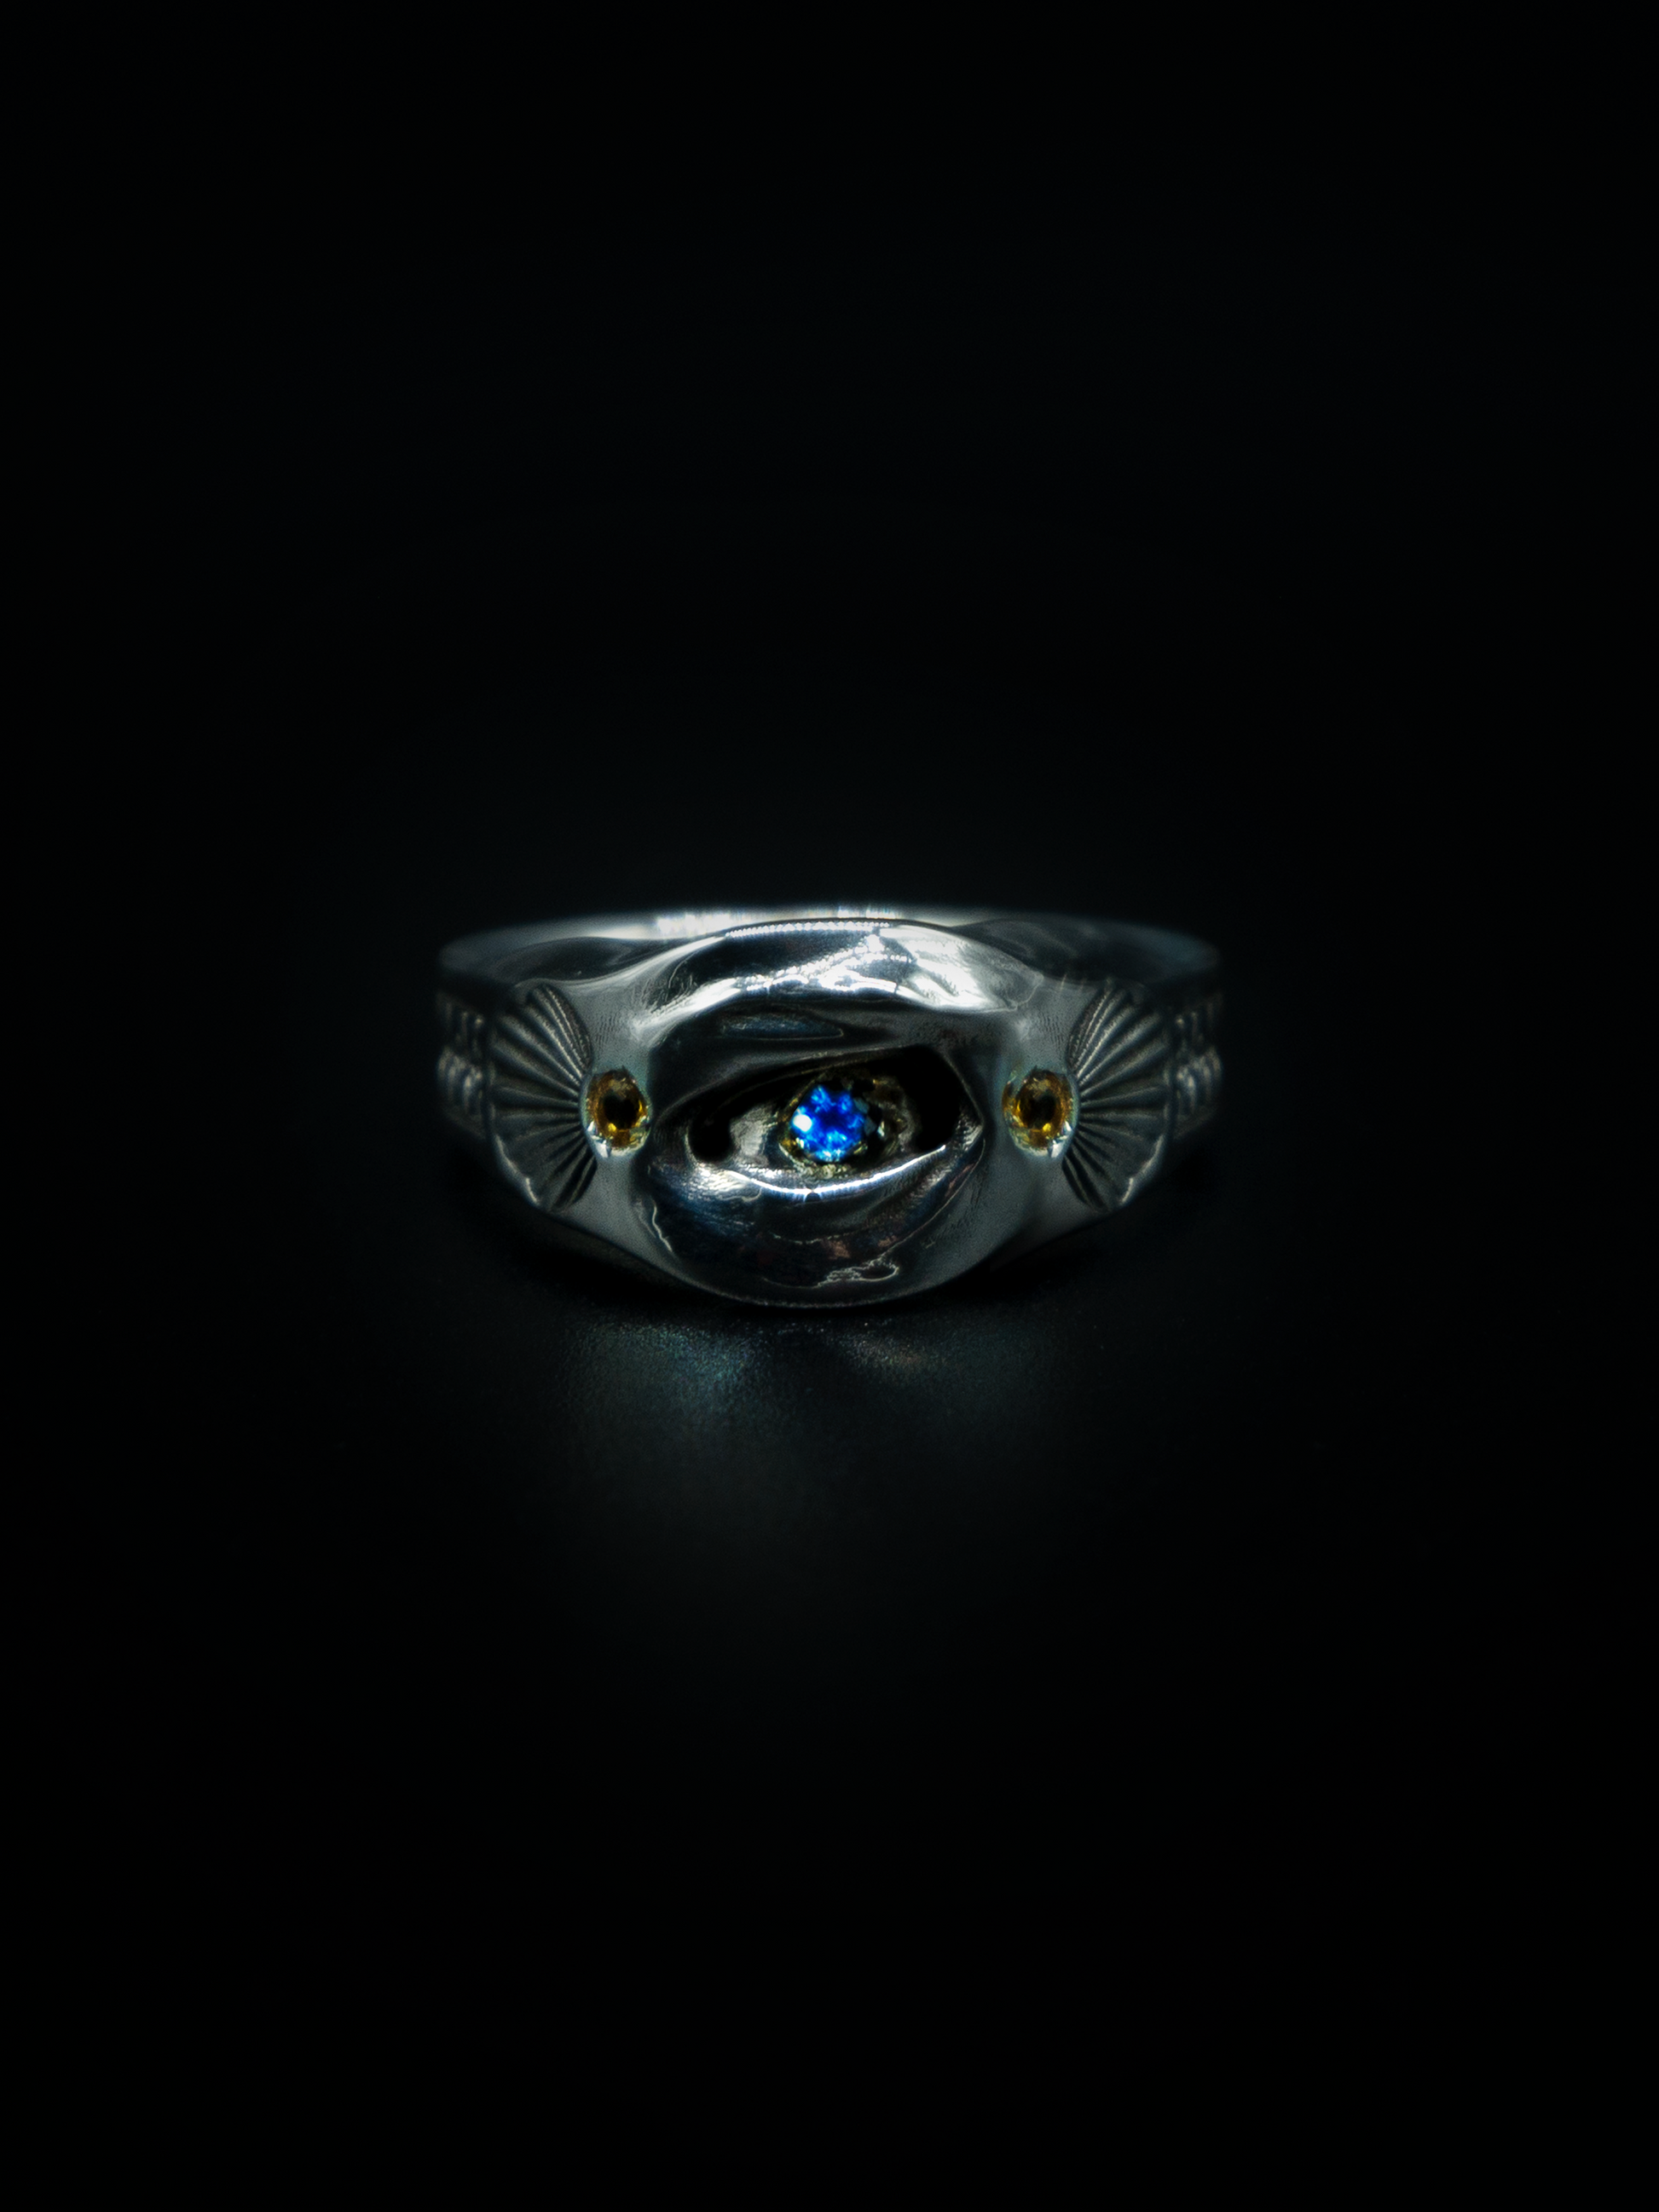 providentia eye ring made from sterling silver, sapphire stone eyes, blinking kinetic moving jewelry